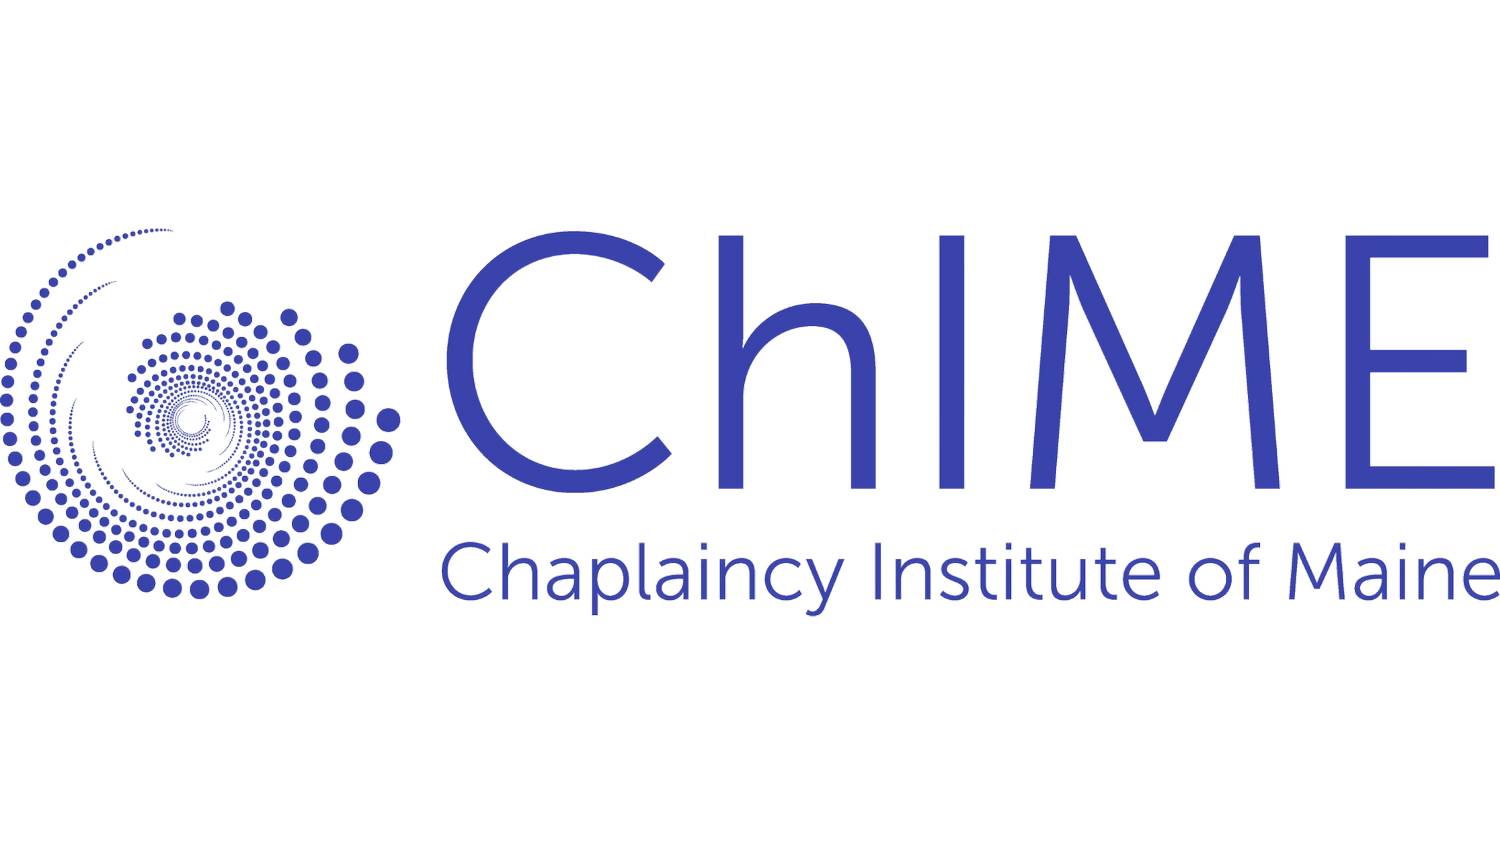 The Chaplaincy Institute of Maine